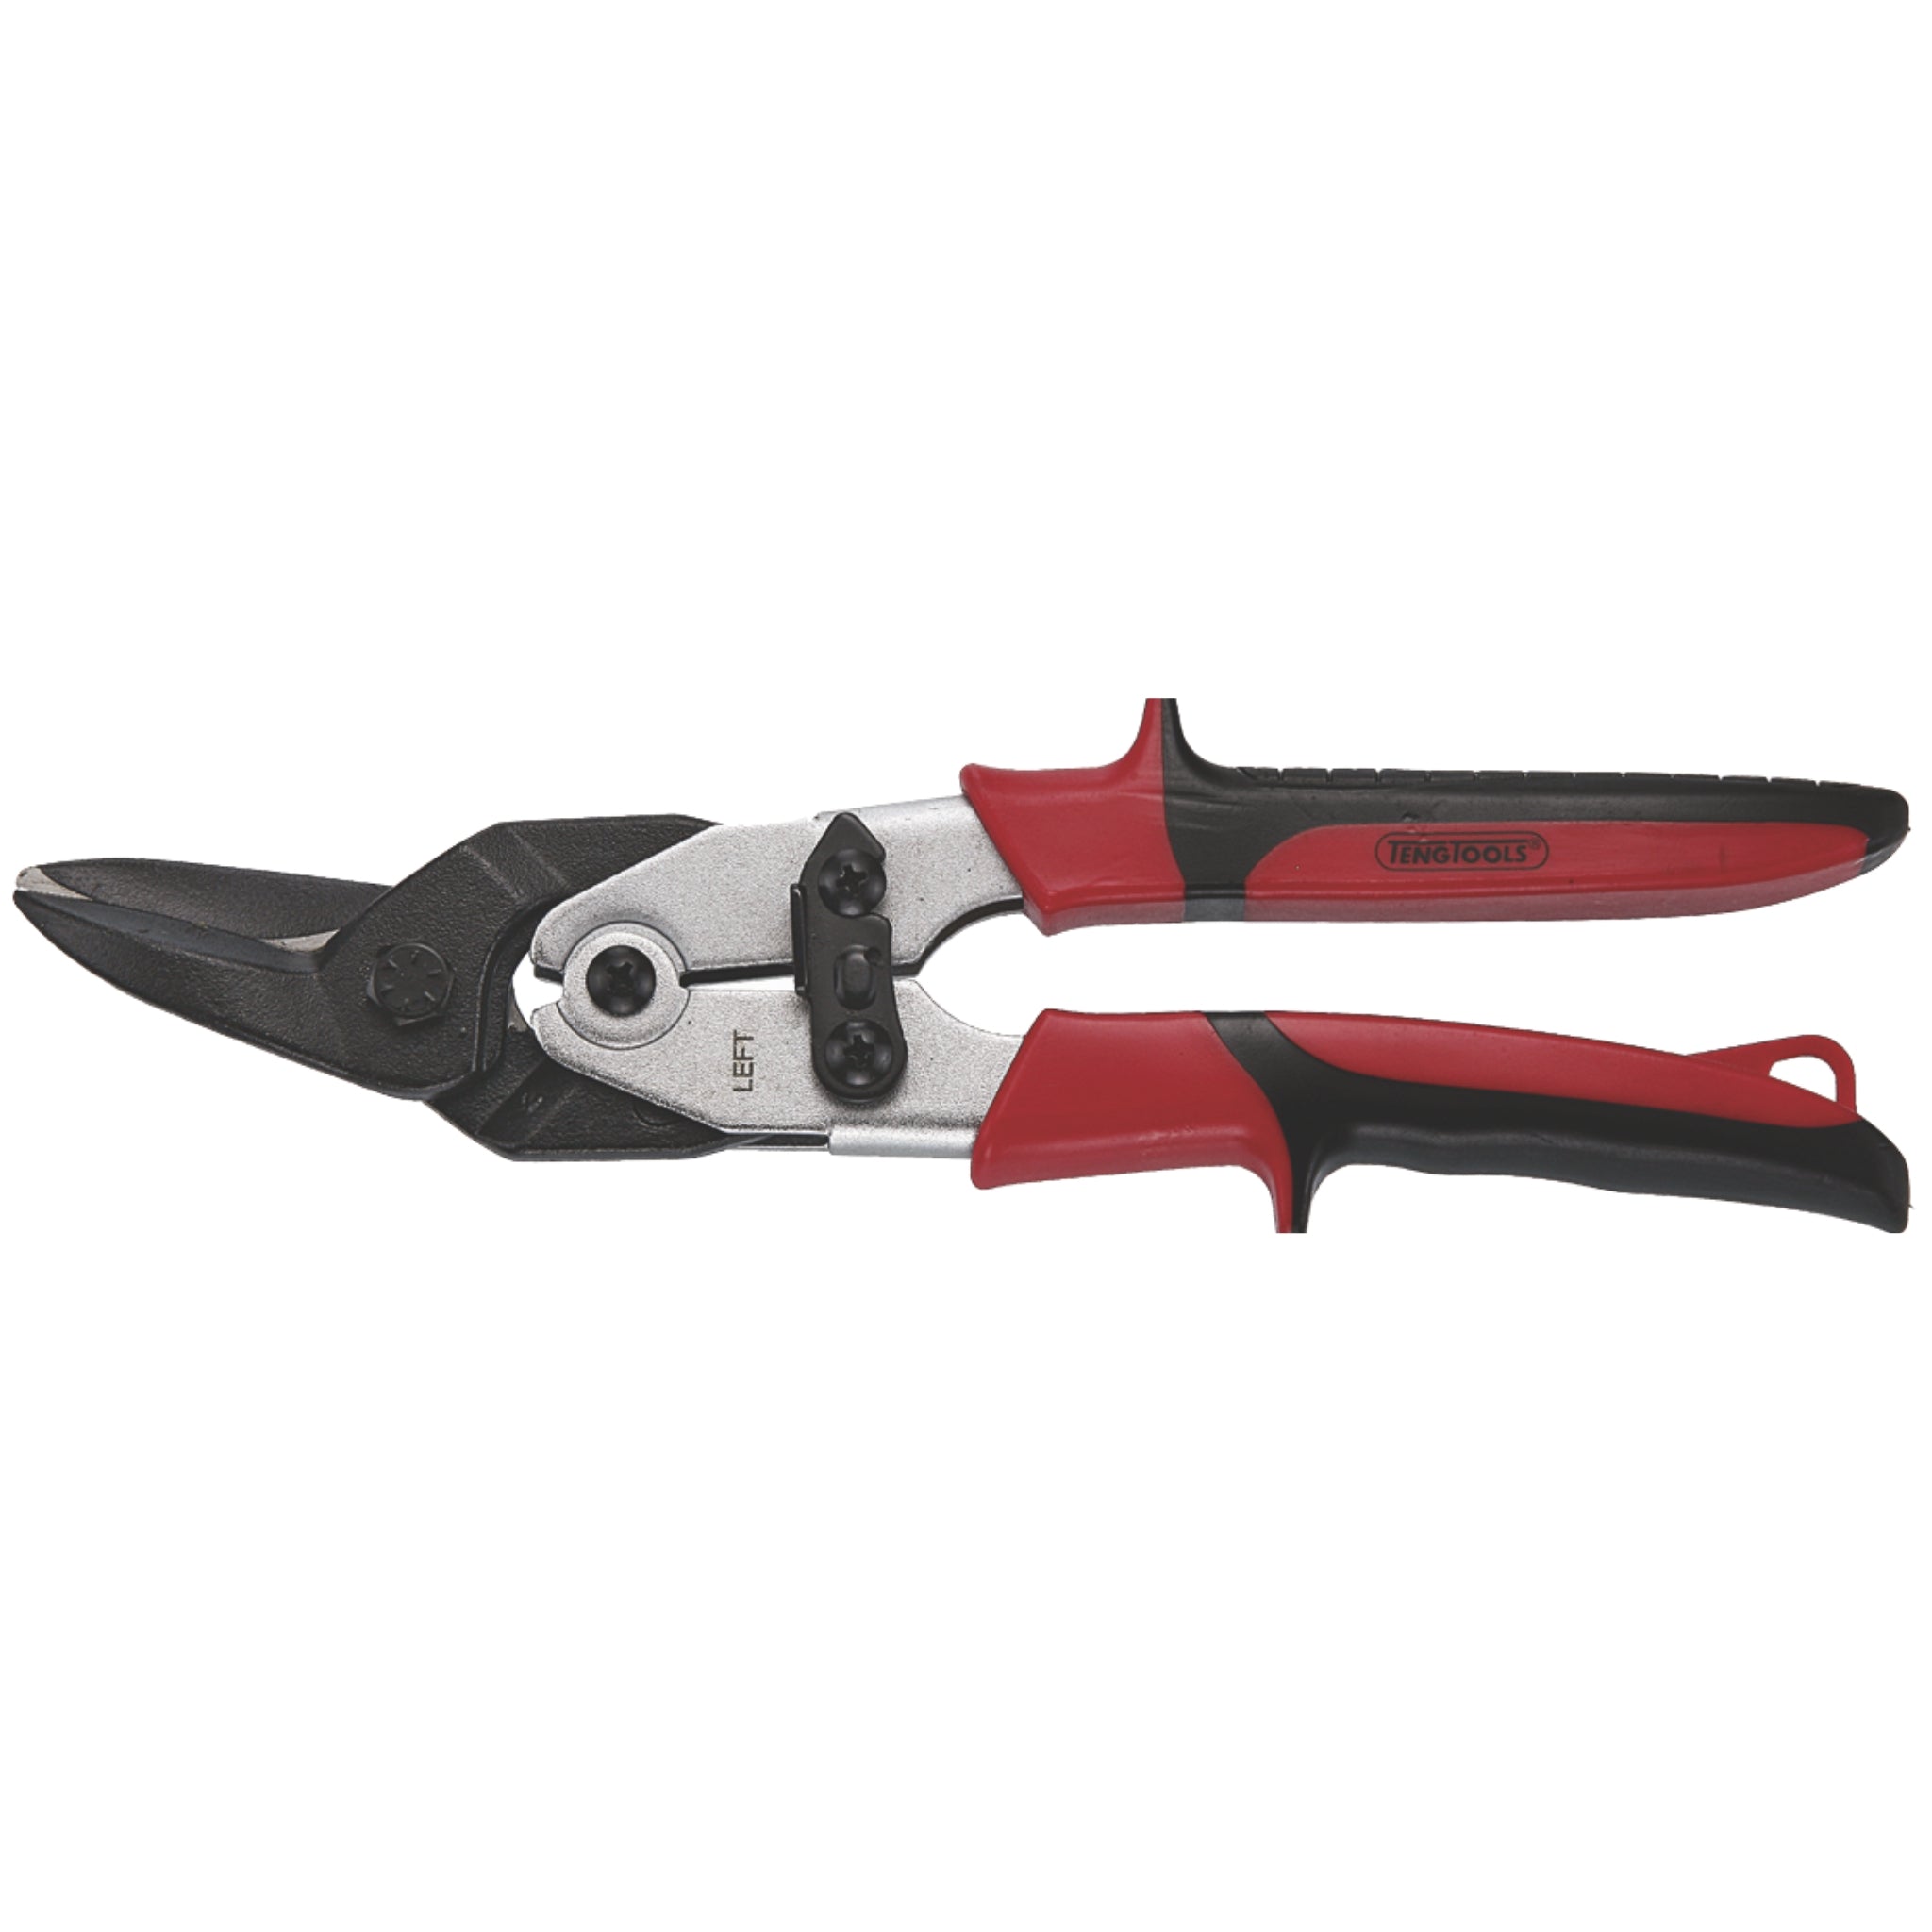 Teng Tools Aviation Tin Snip Pliers Range - Offset Straight / Right 10 Inch